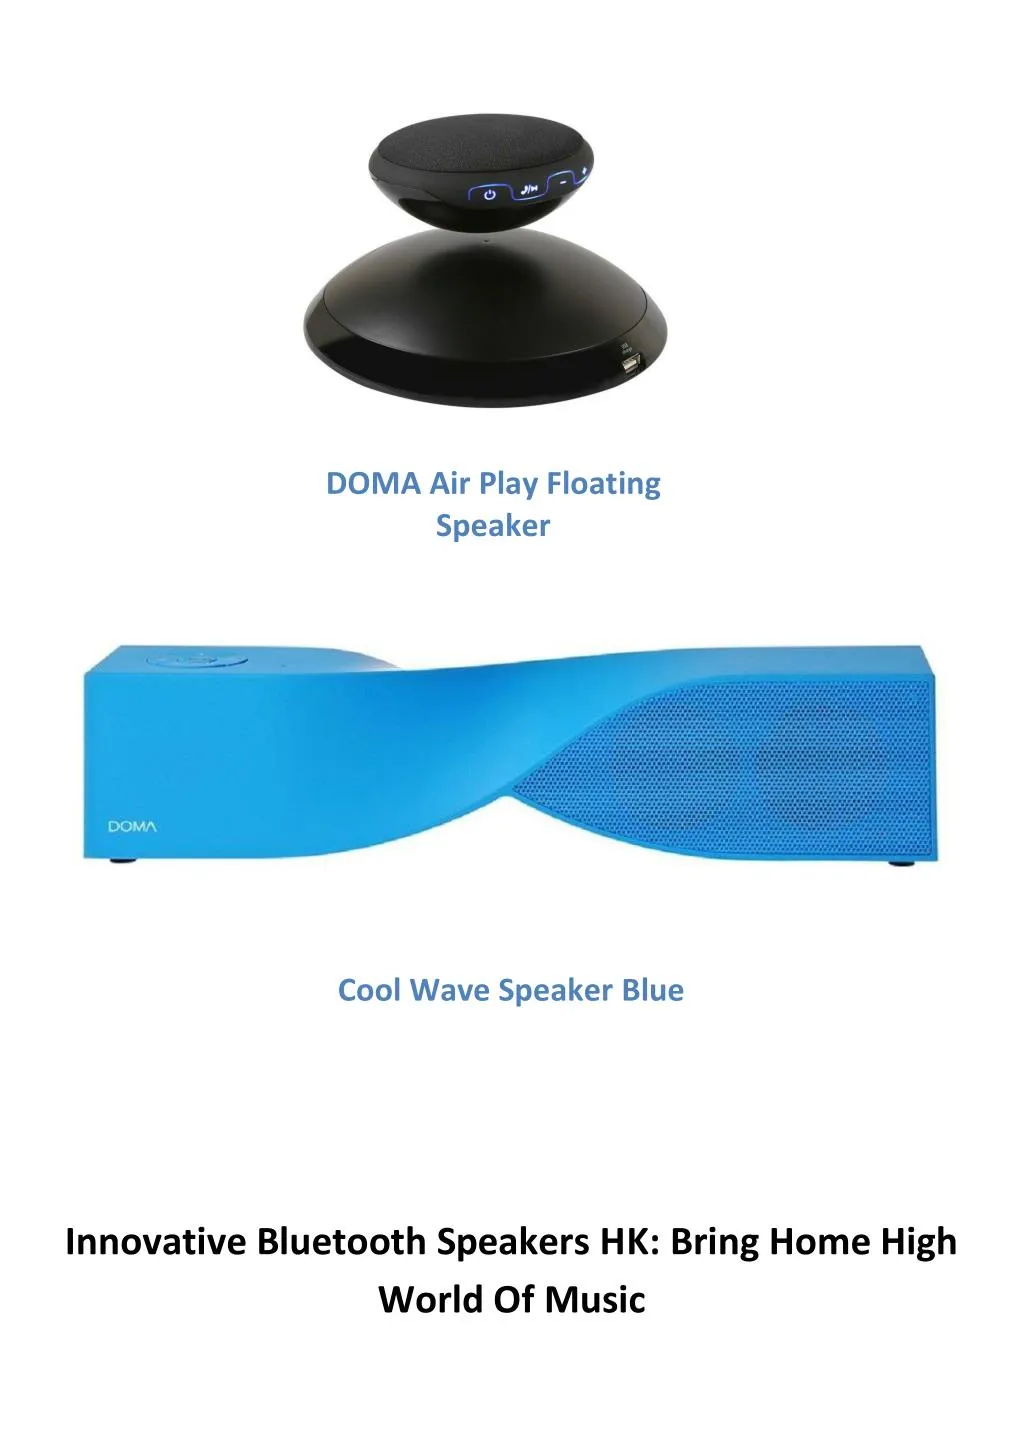 doma air play floating speaker